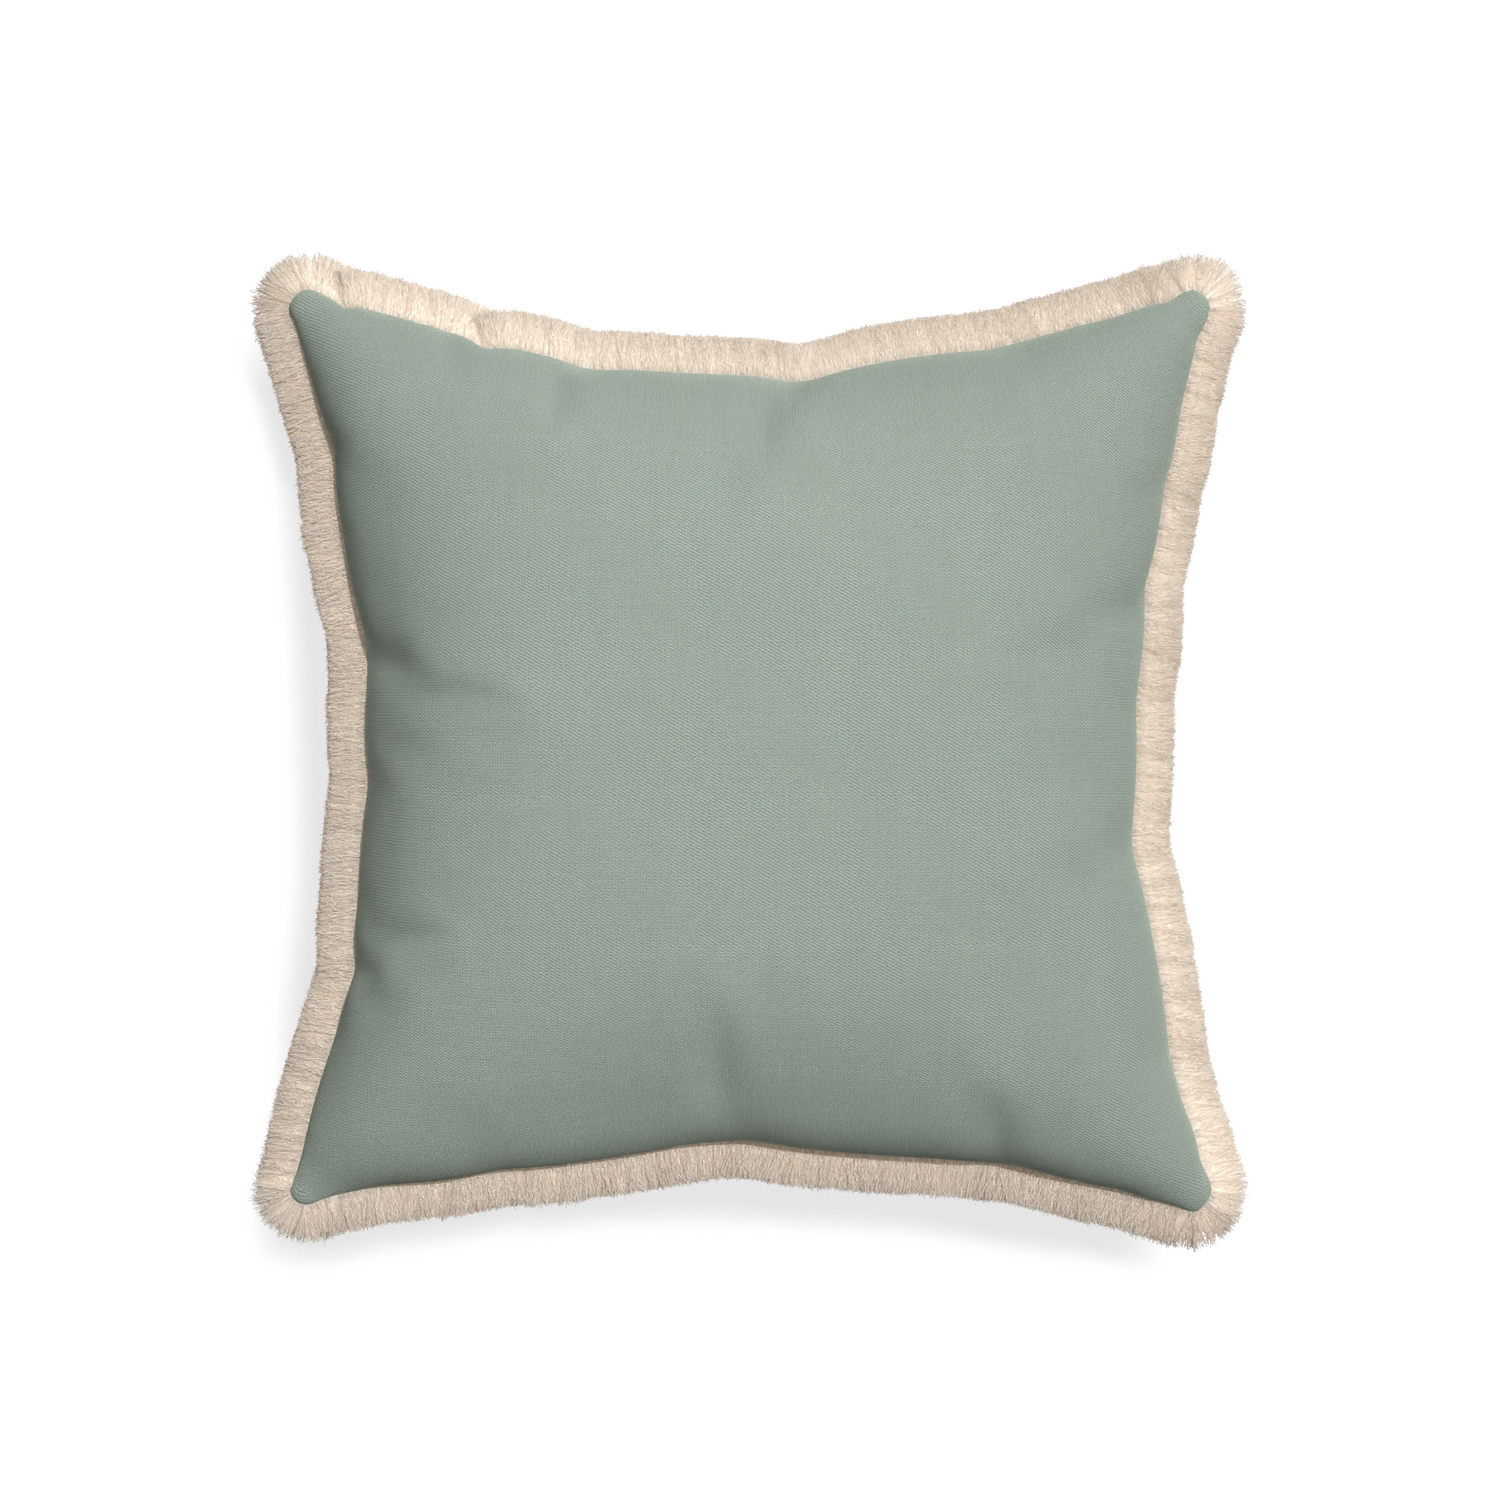 20-square sage custom sage green cottonpillow with cream fringe on white background